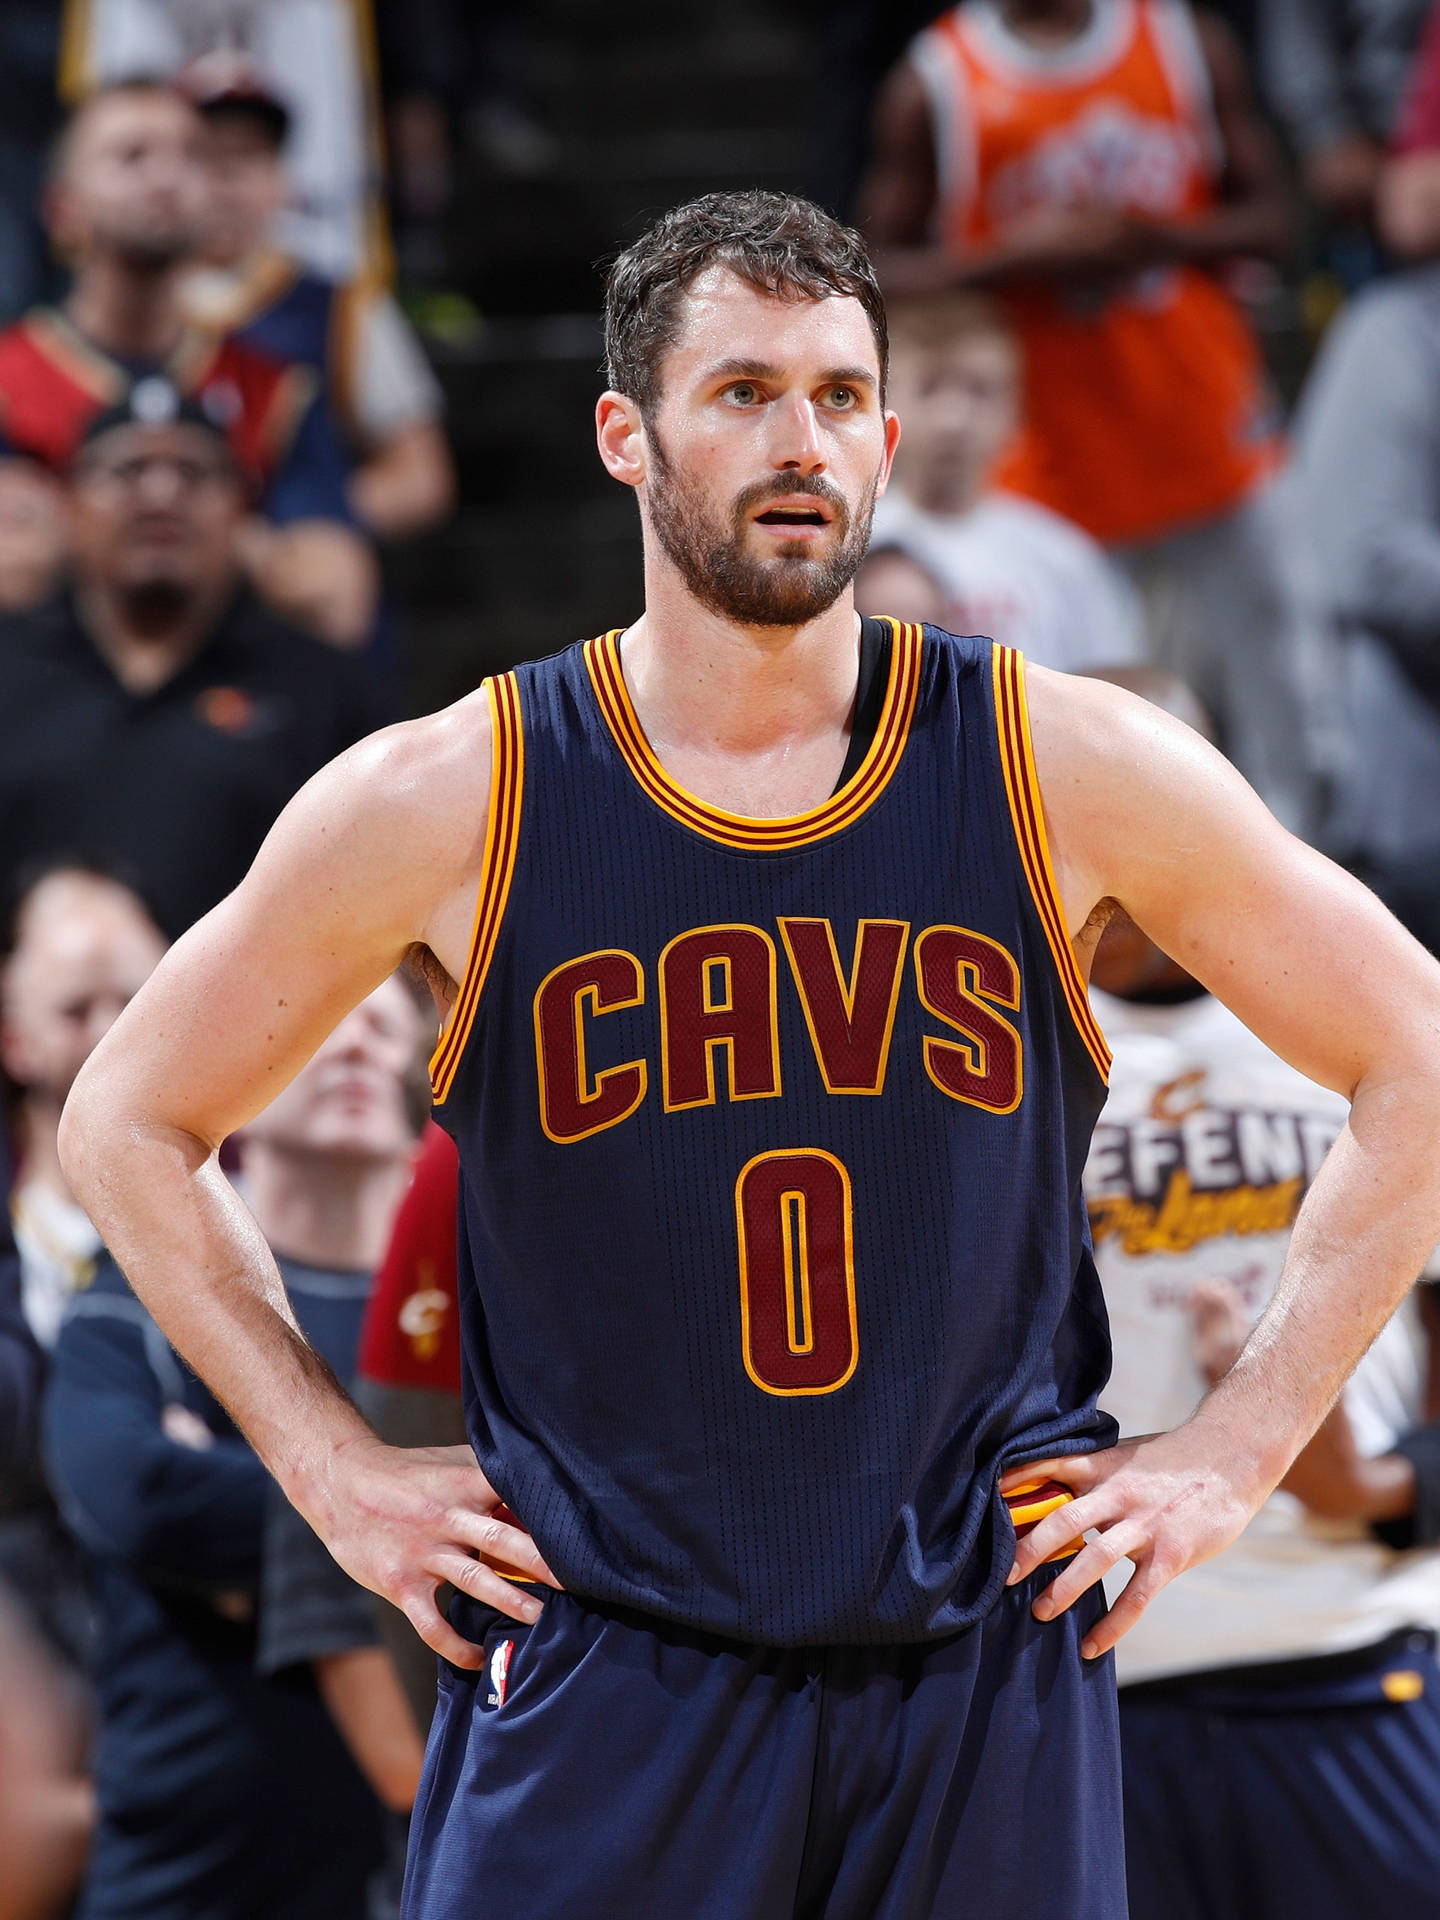 Kevin Love - Prominent Nba Star Background